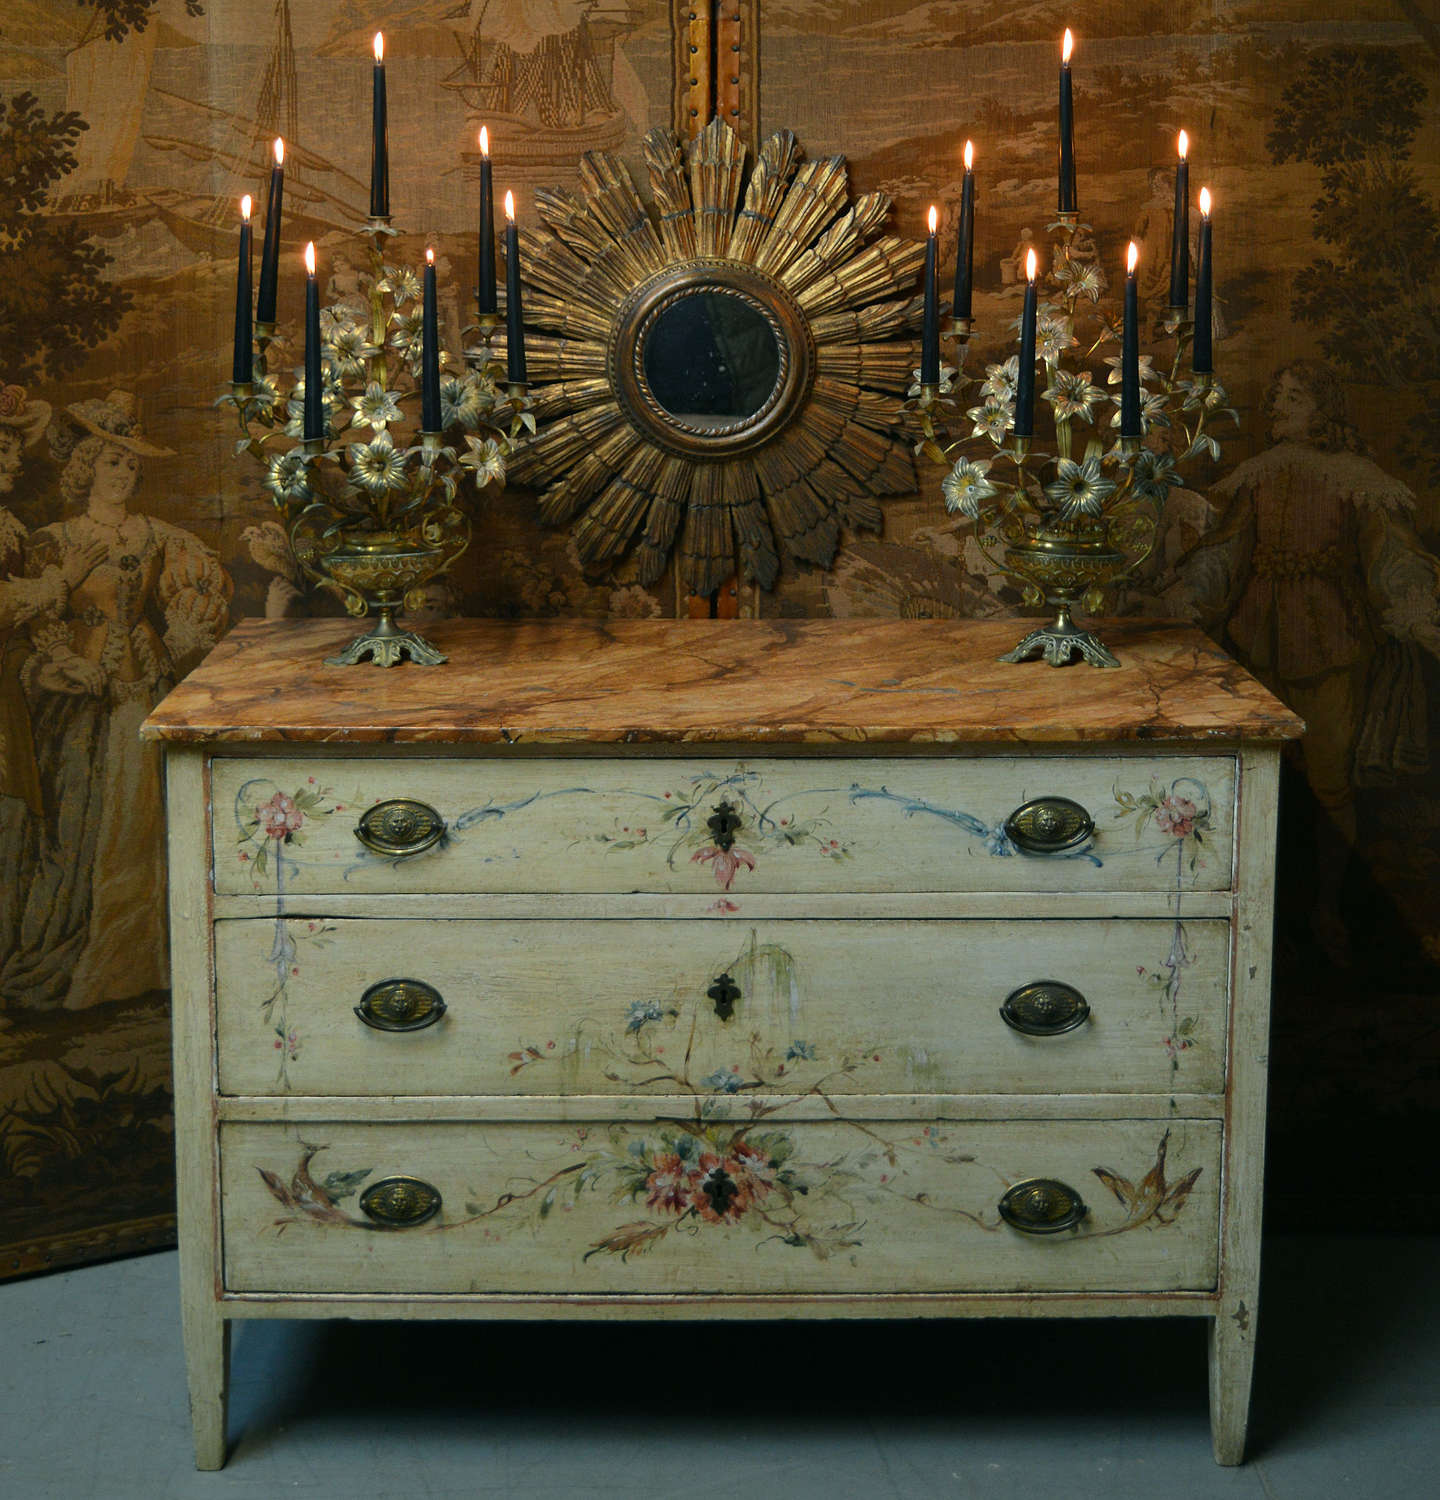 Late 18th Century Italian Neoclassical hand painted commode